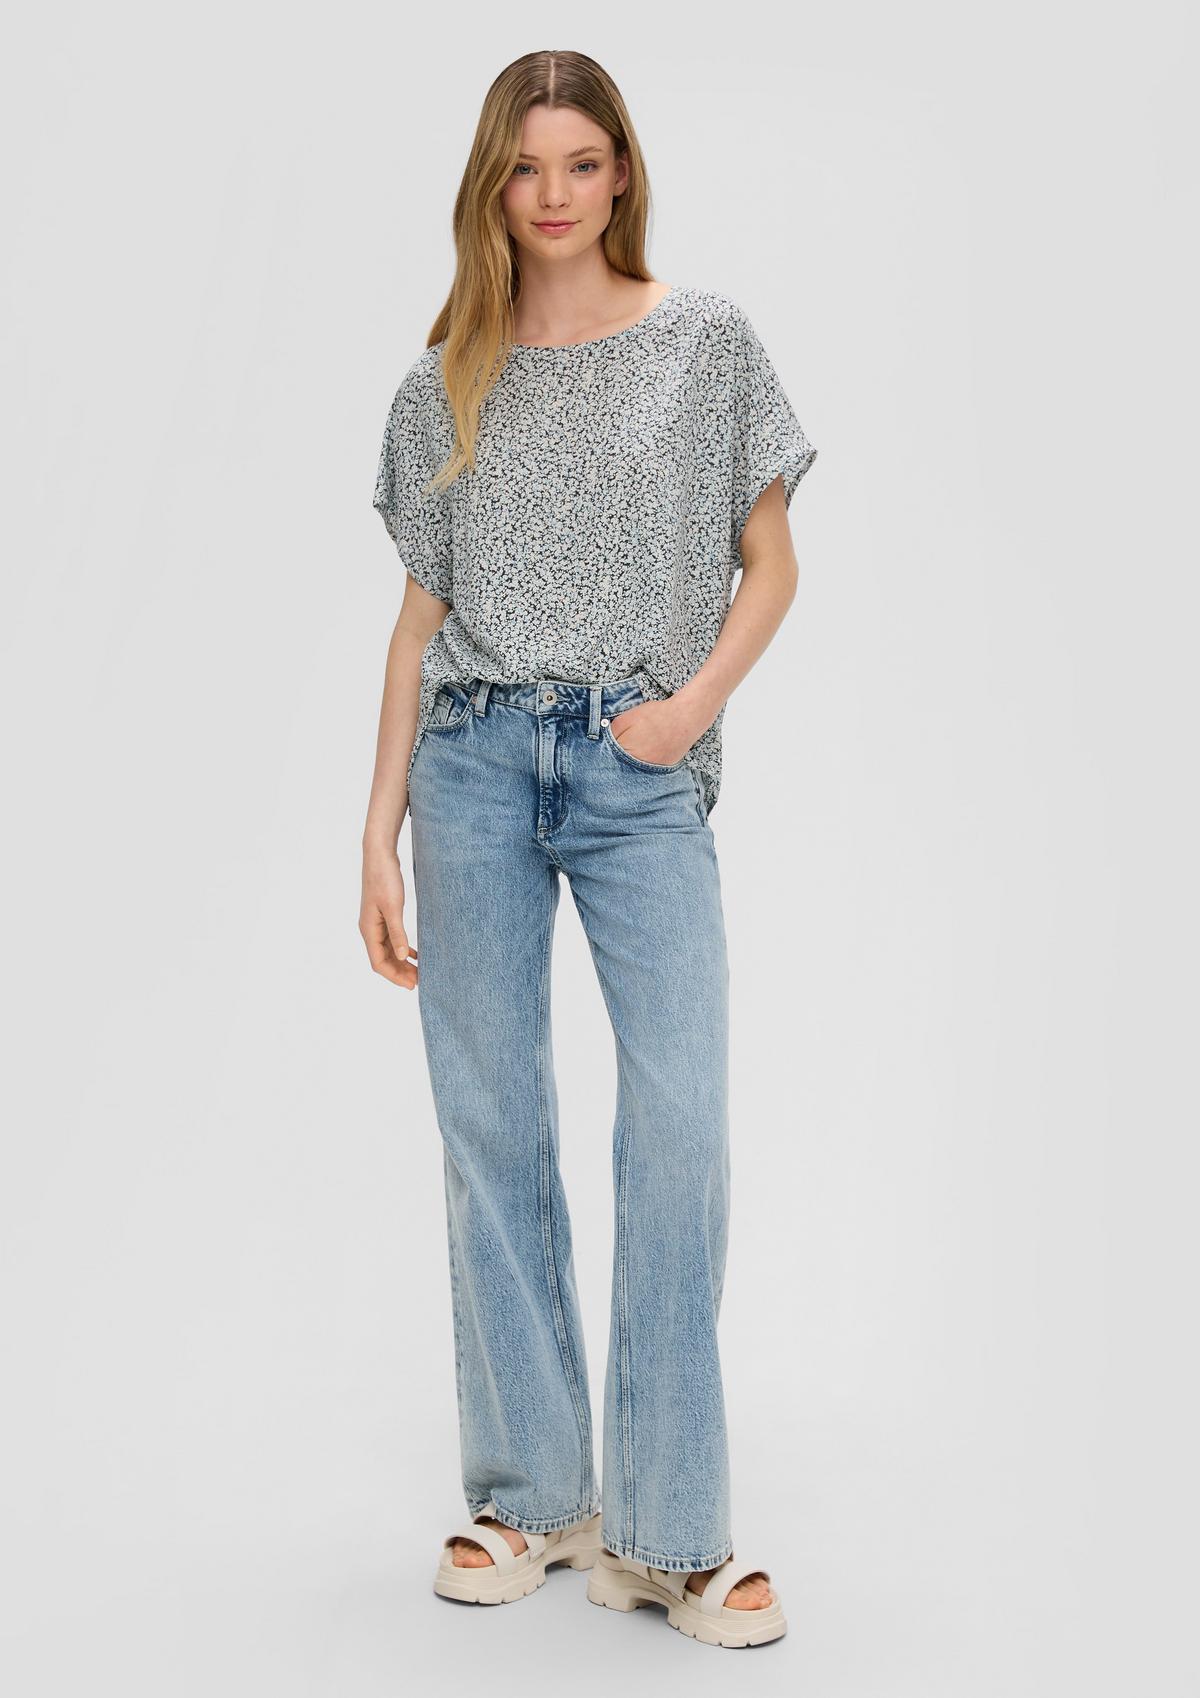 s.Oliver Oversized top with an elongated back